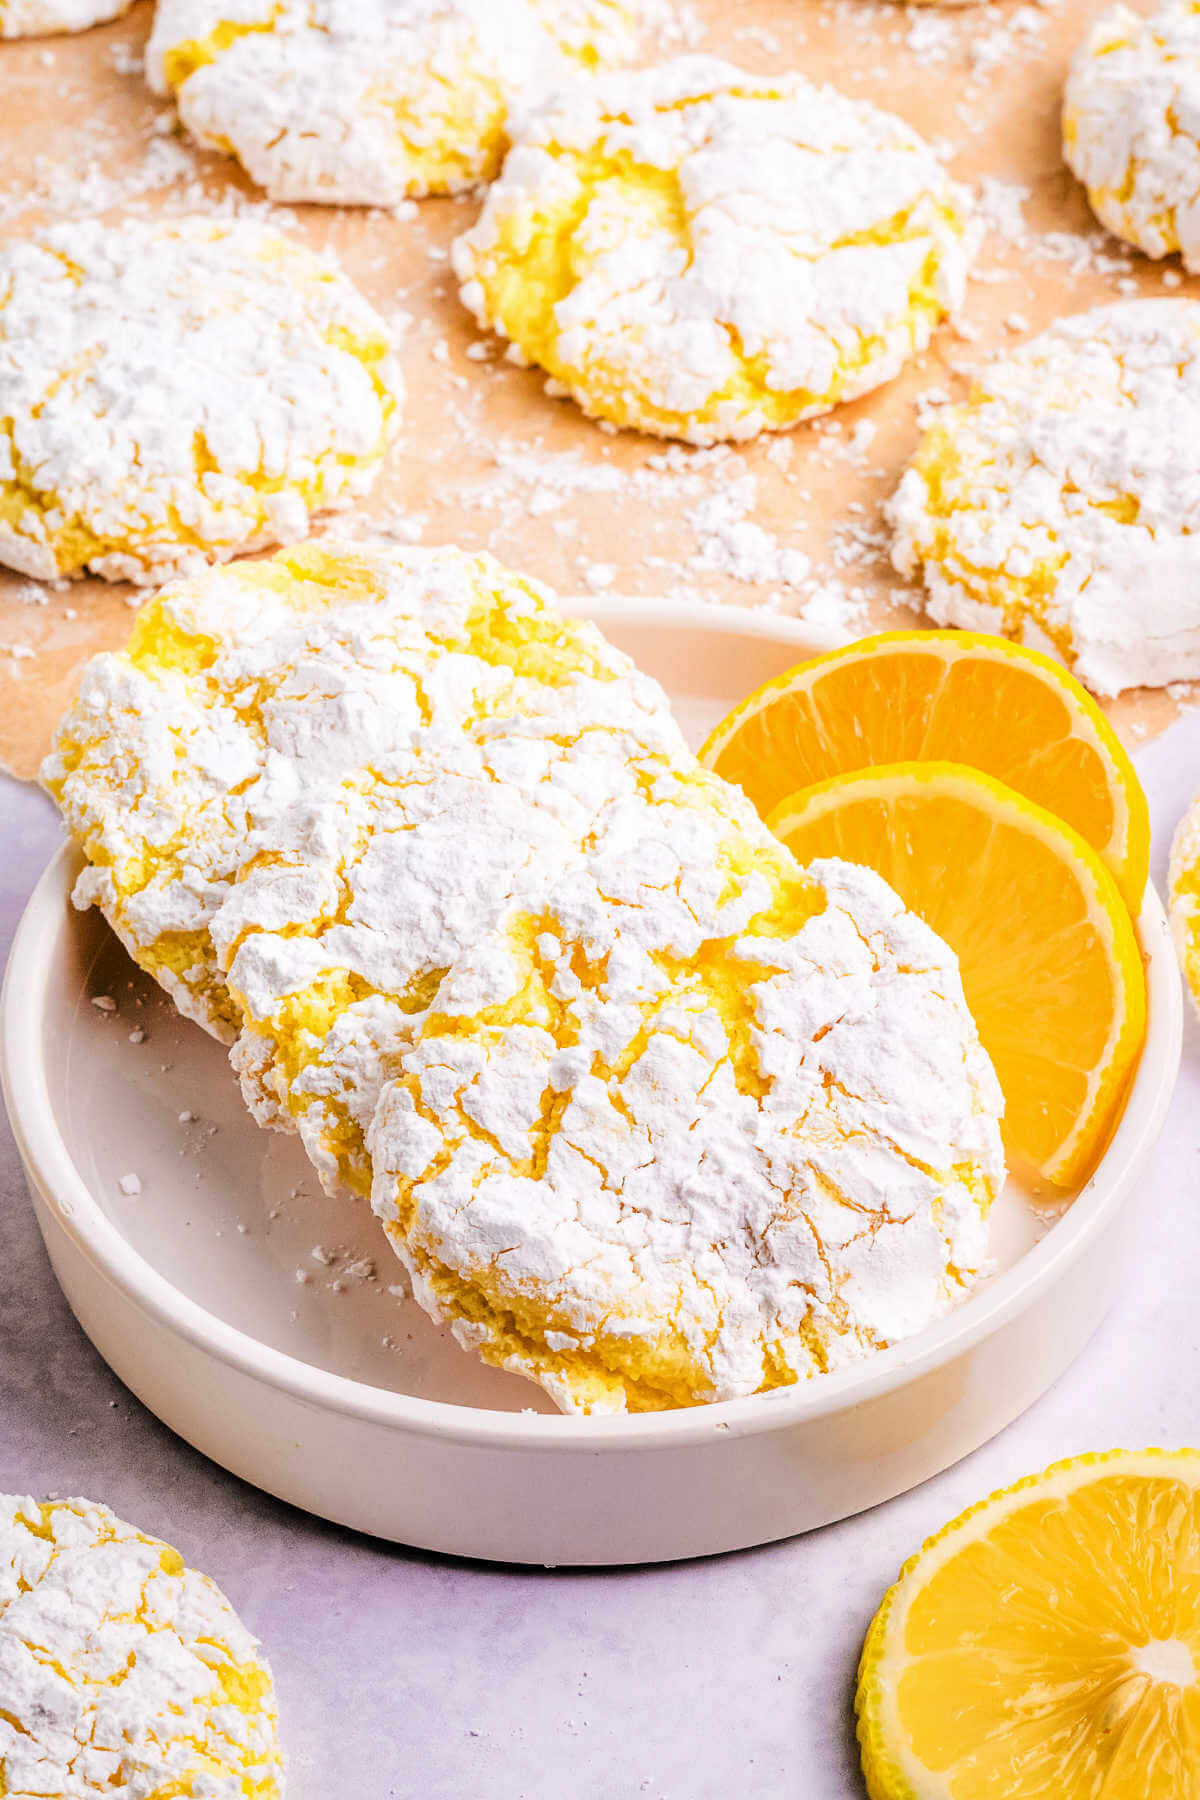 lemon crinkle cookies in a white dish with lemon slices on a table.